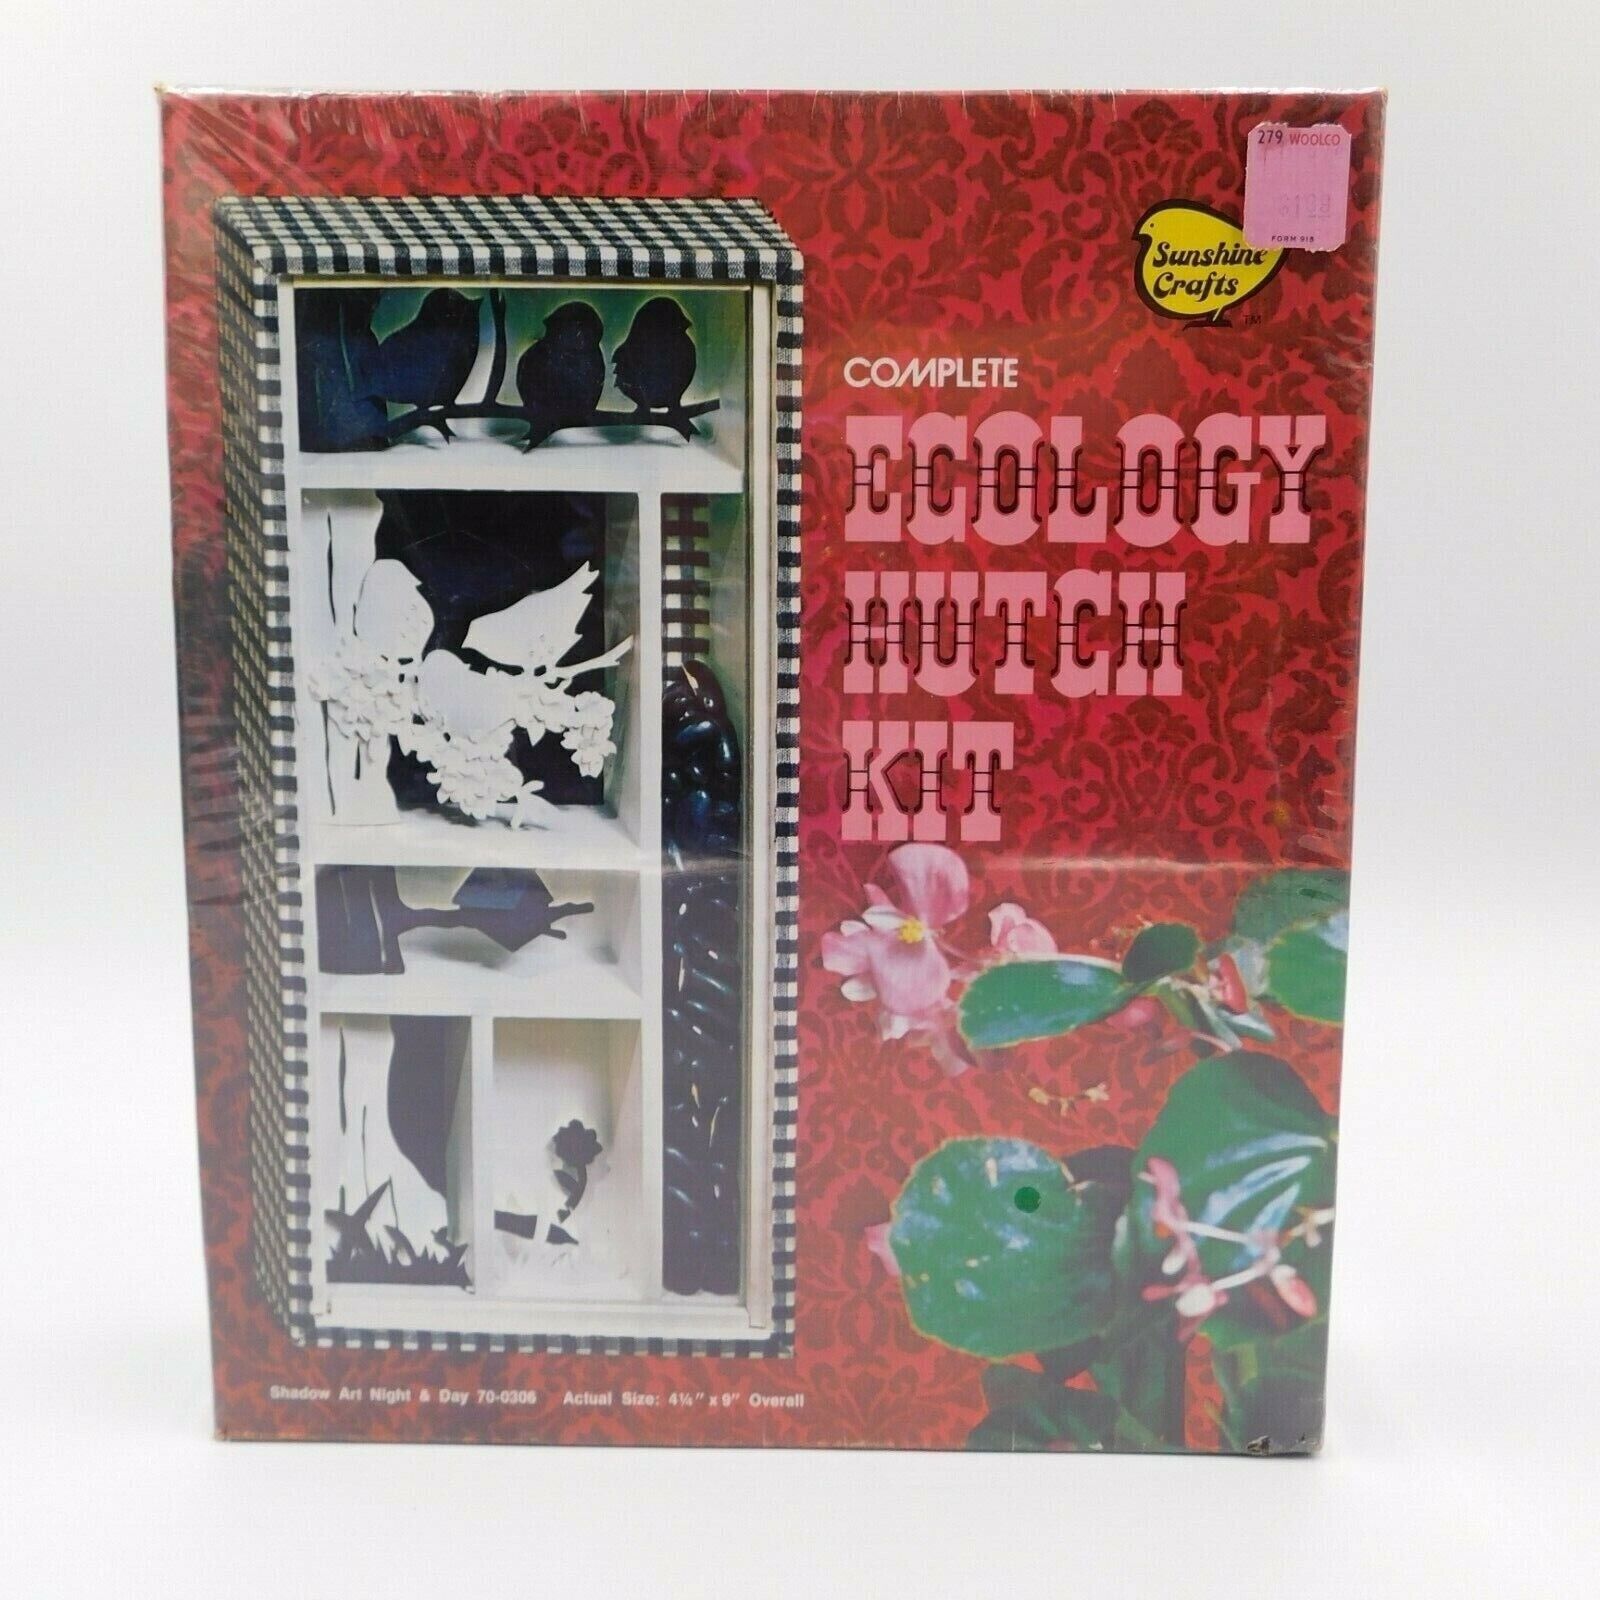 Primary image for Sunshine Crafts Ecology Hutch Kit 1973 Shadow Art Night & Day Sealed Vintage